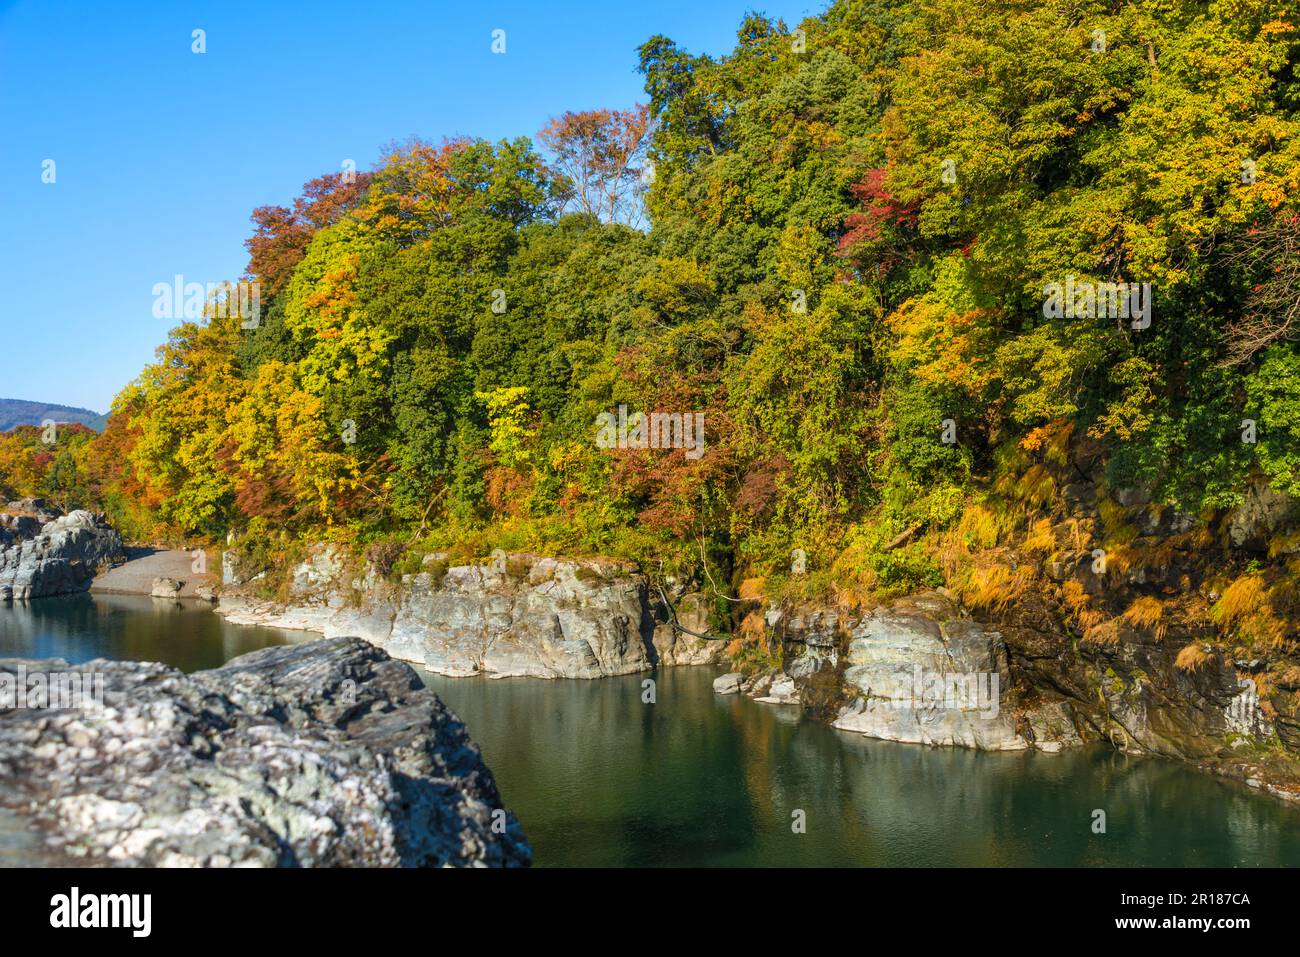 Nagatoro in autumn, Stream of the Arakawa River and a thicket with autumn leaves Stock Photo